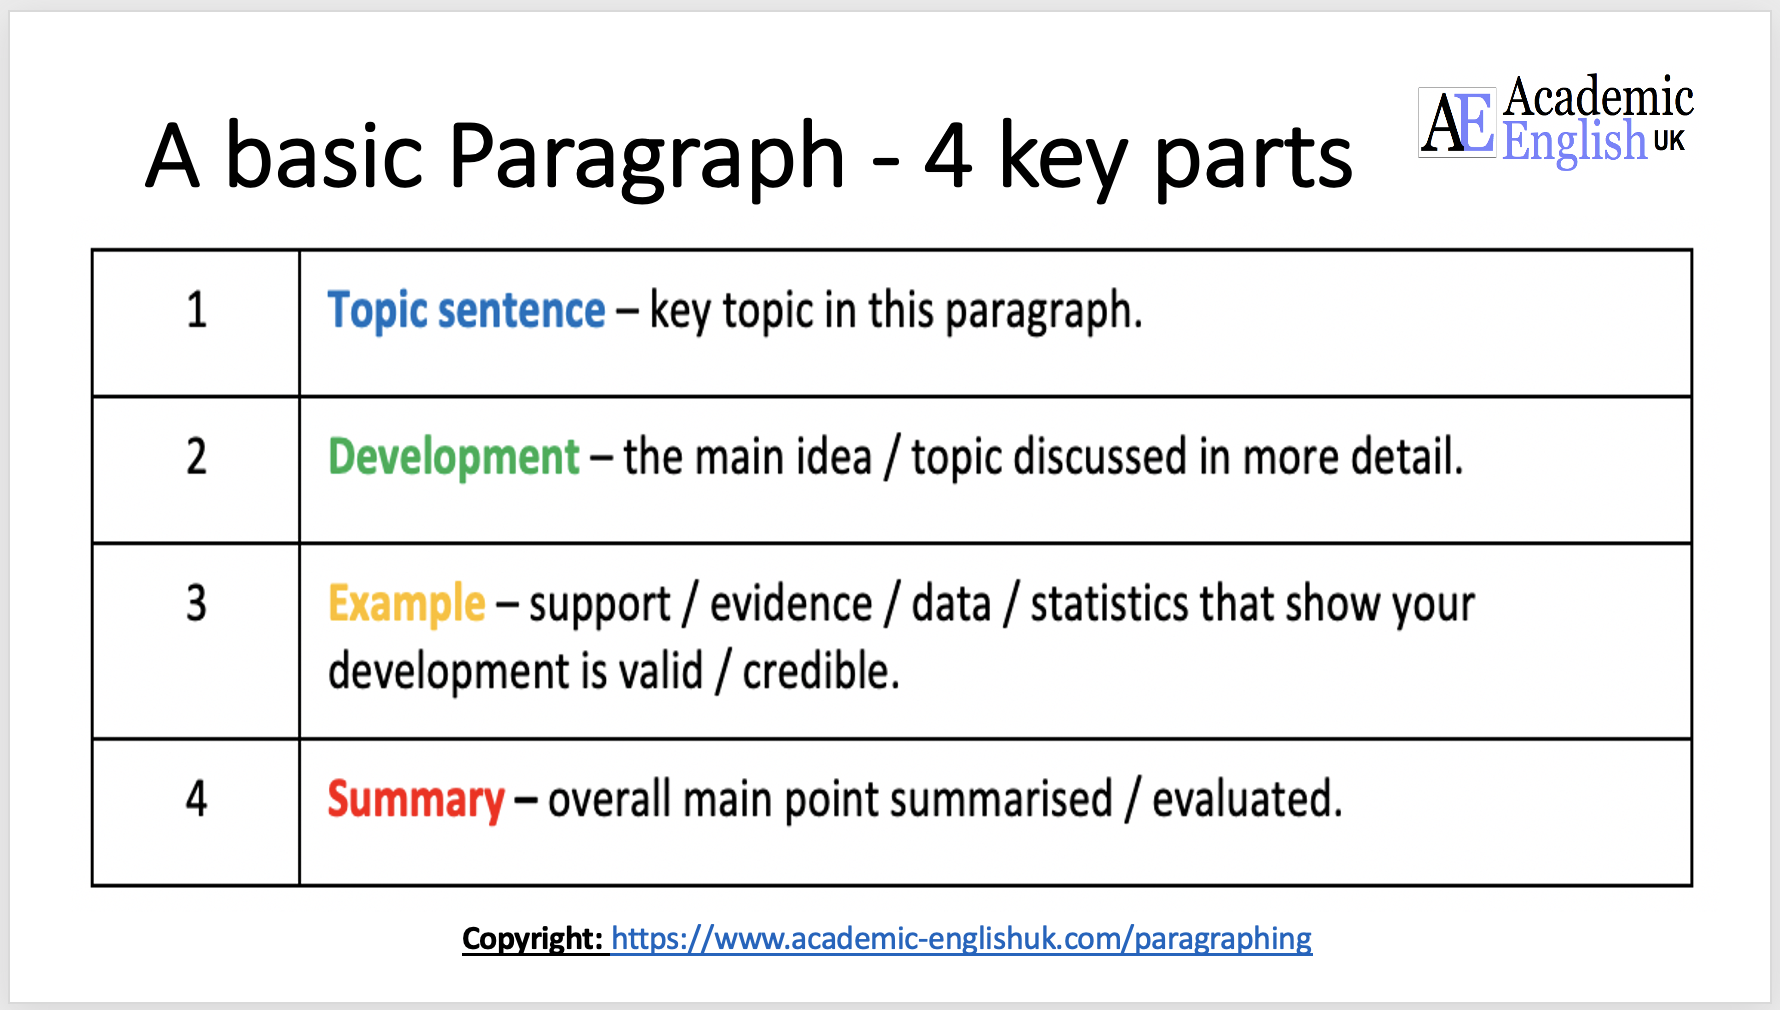 Academic Paragraphing - how to write an academic paragraph